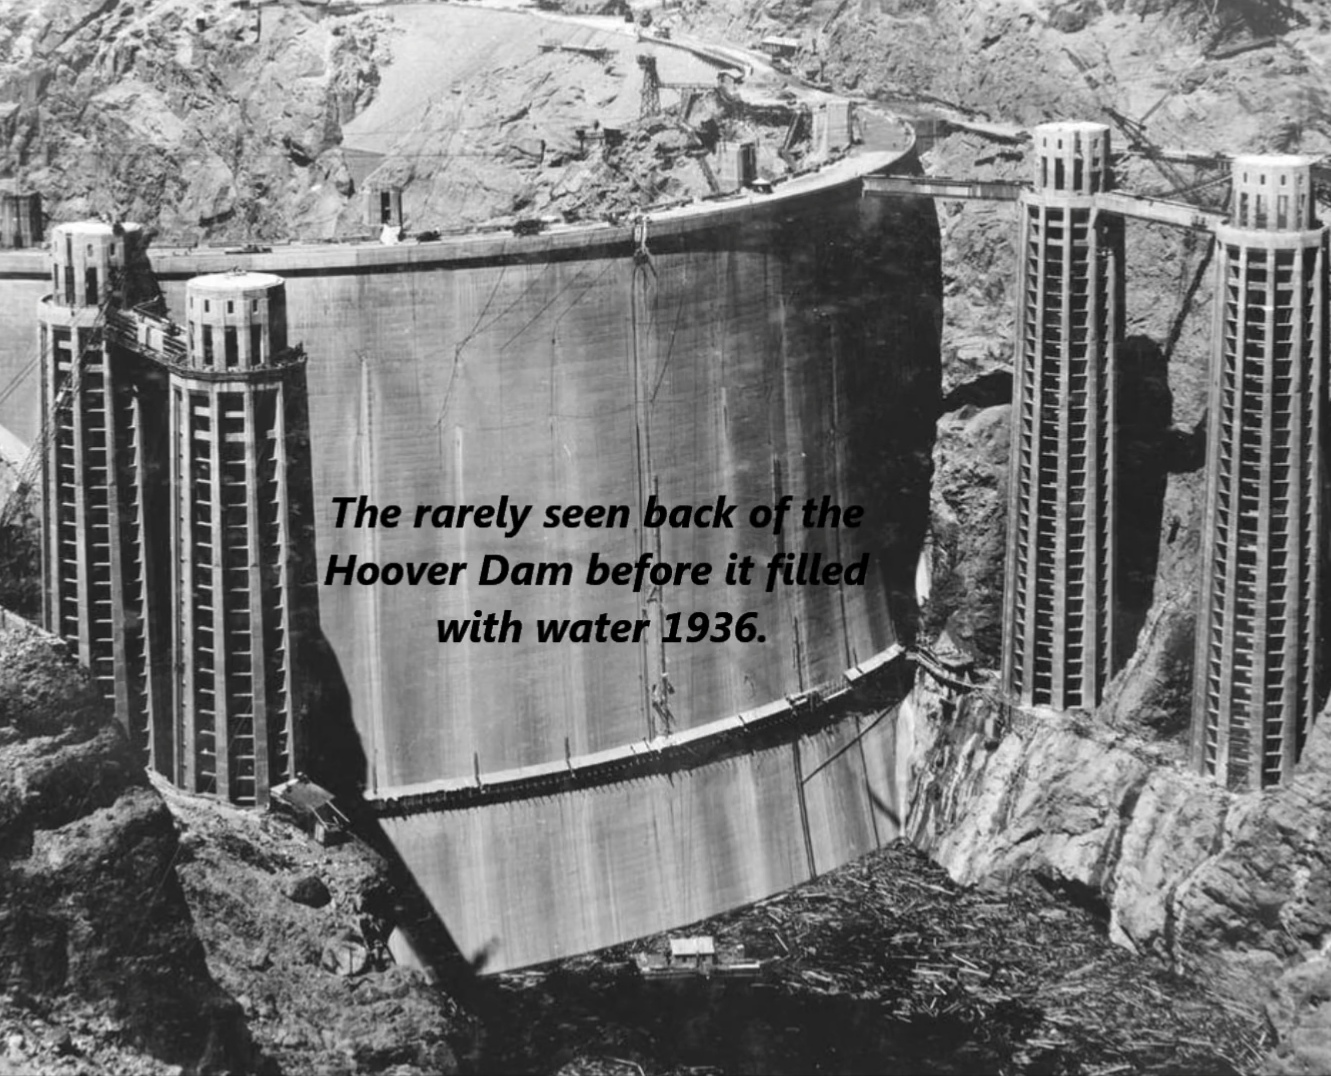 back of the hoover dam - The rarely seen back of the Hoover Dam before it filled with water 1936.